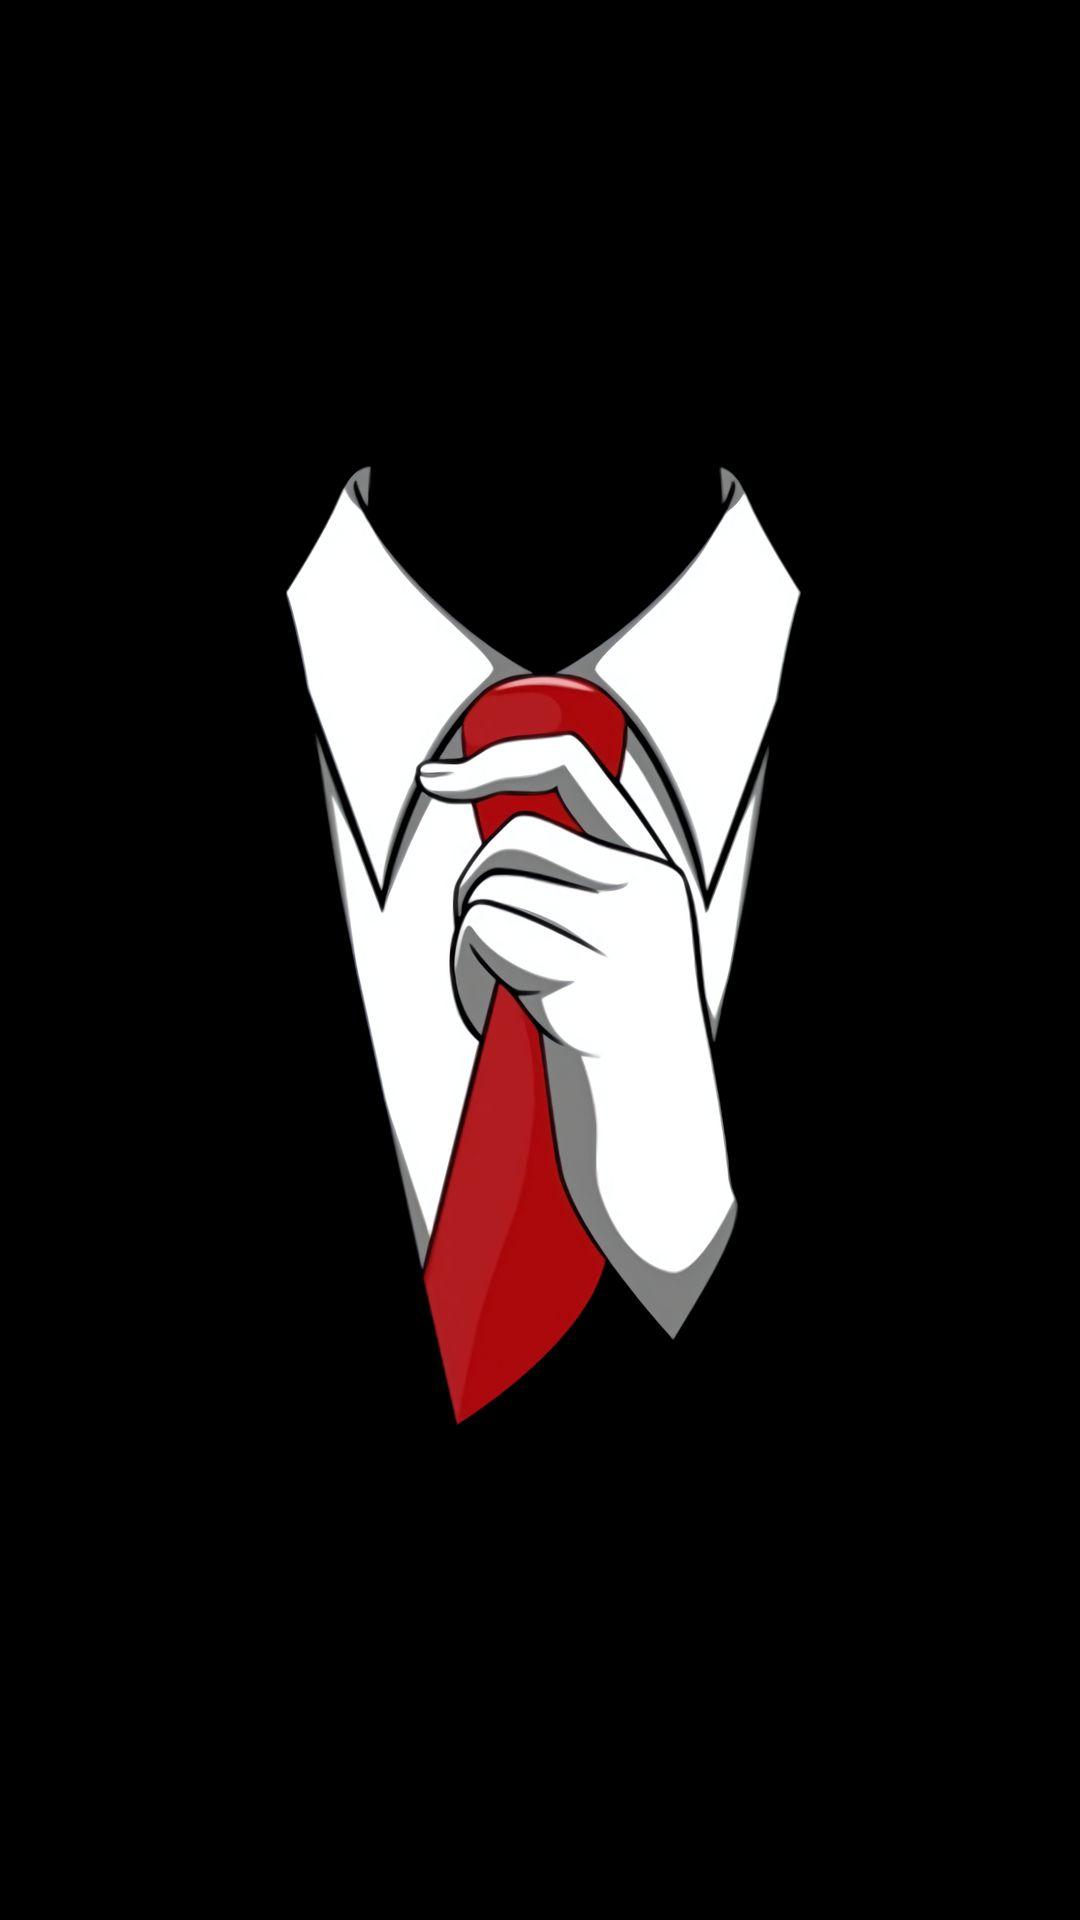 Red tie to see more creative wallpaper!